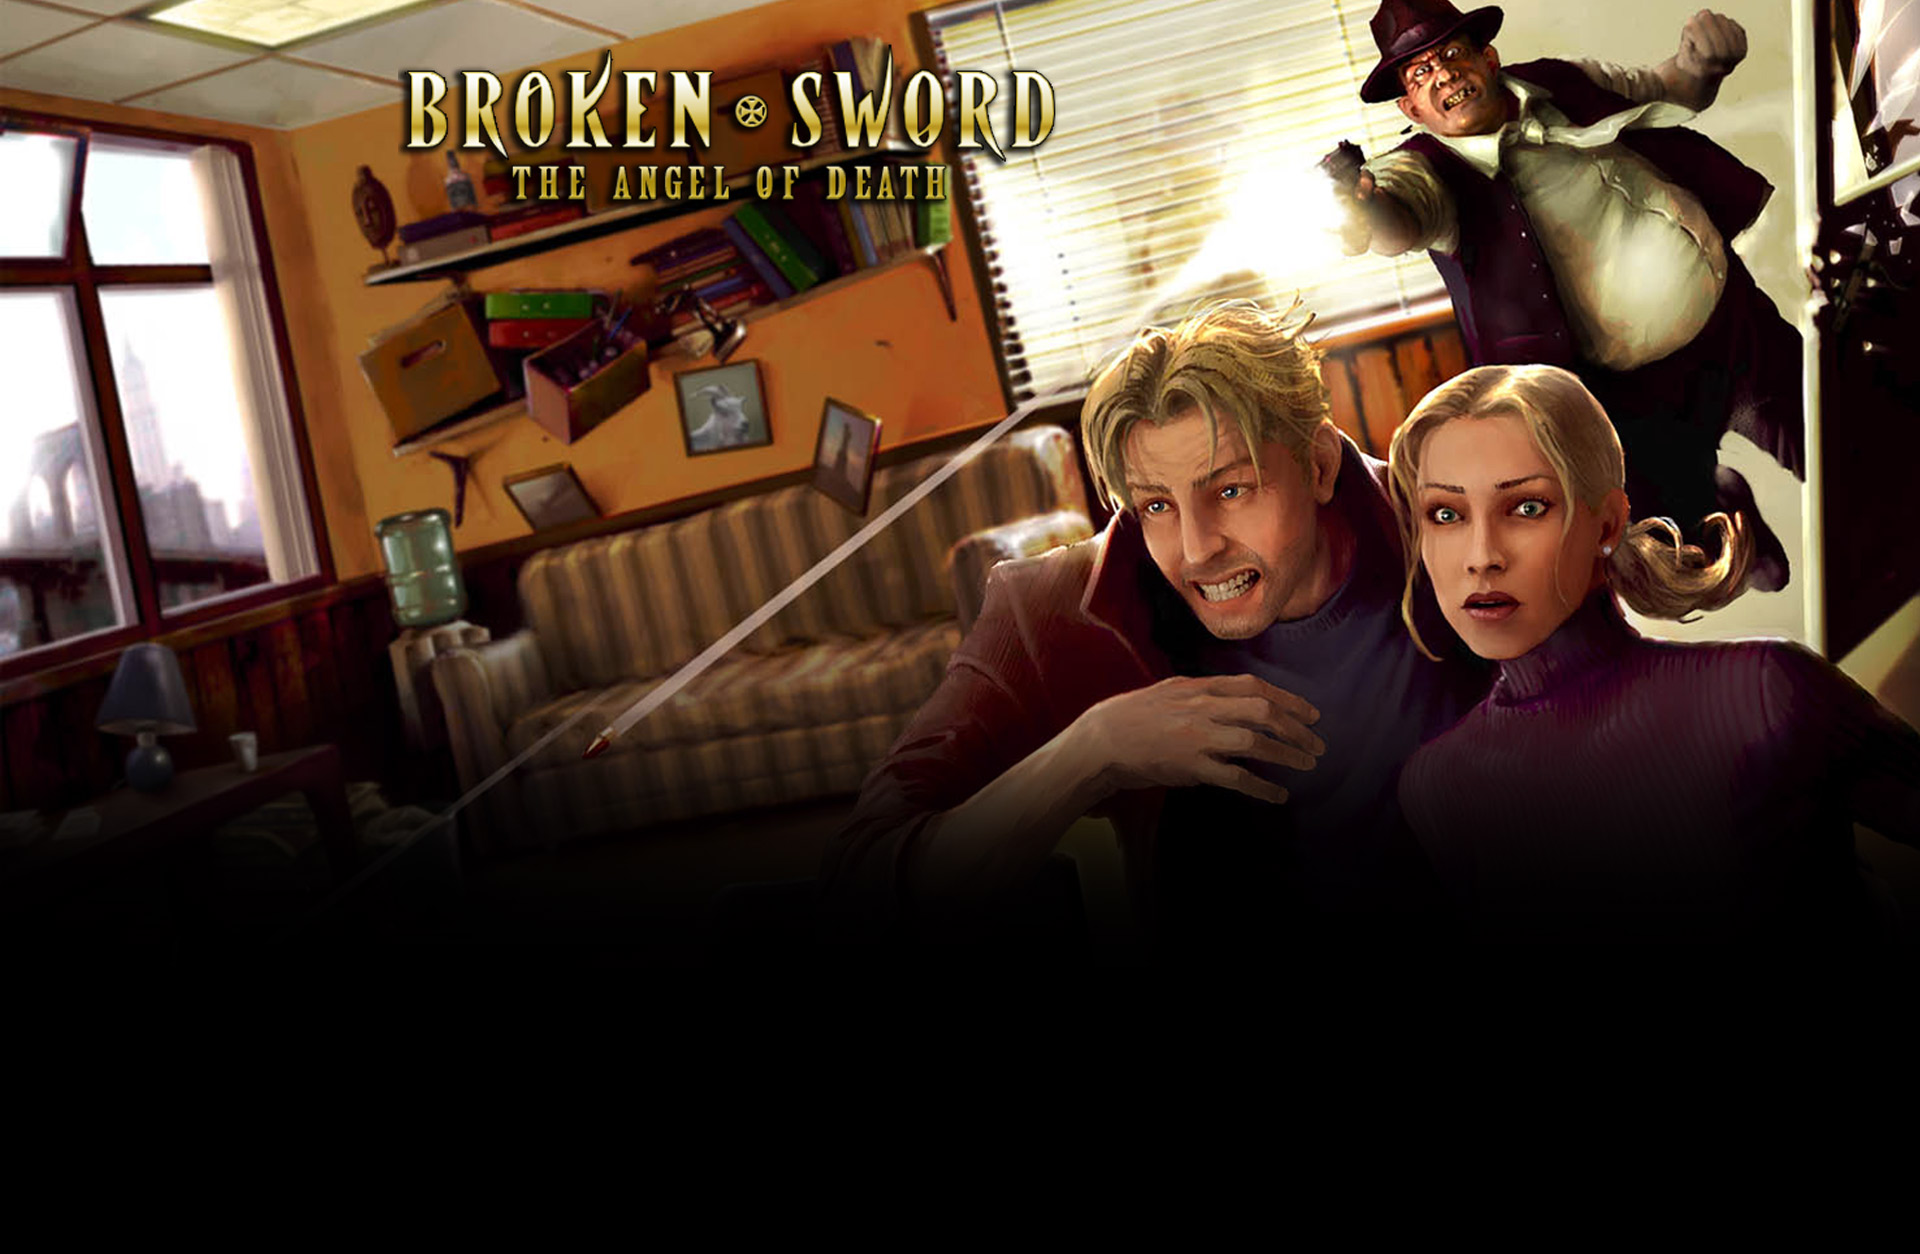 Broken Sword 4 - the Angel of Death Steam Key for PC - Buy now